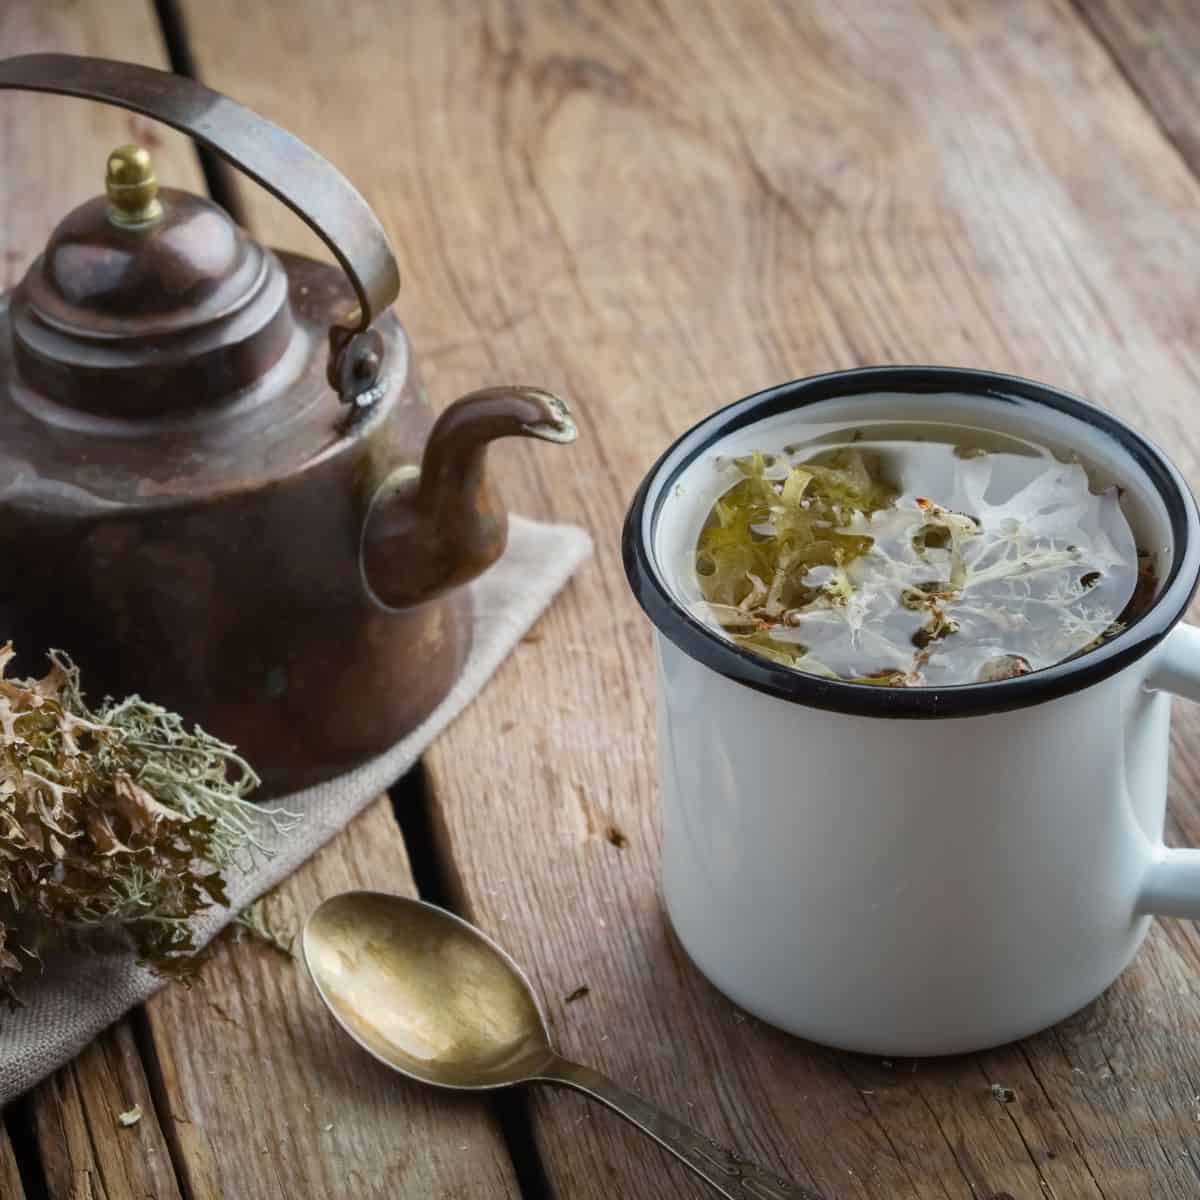 A photo of irish sea moss steeping in water in a mug next to a gold spoon and bronze tea kettle.